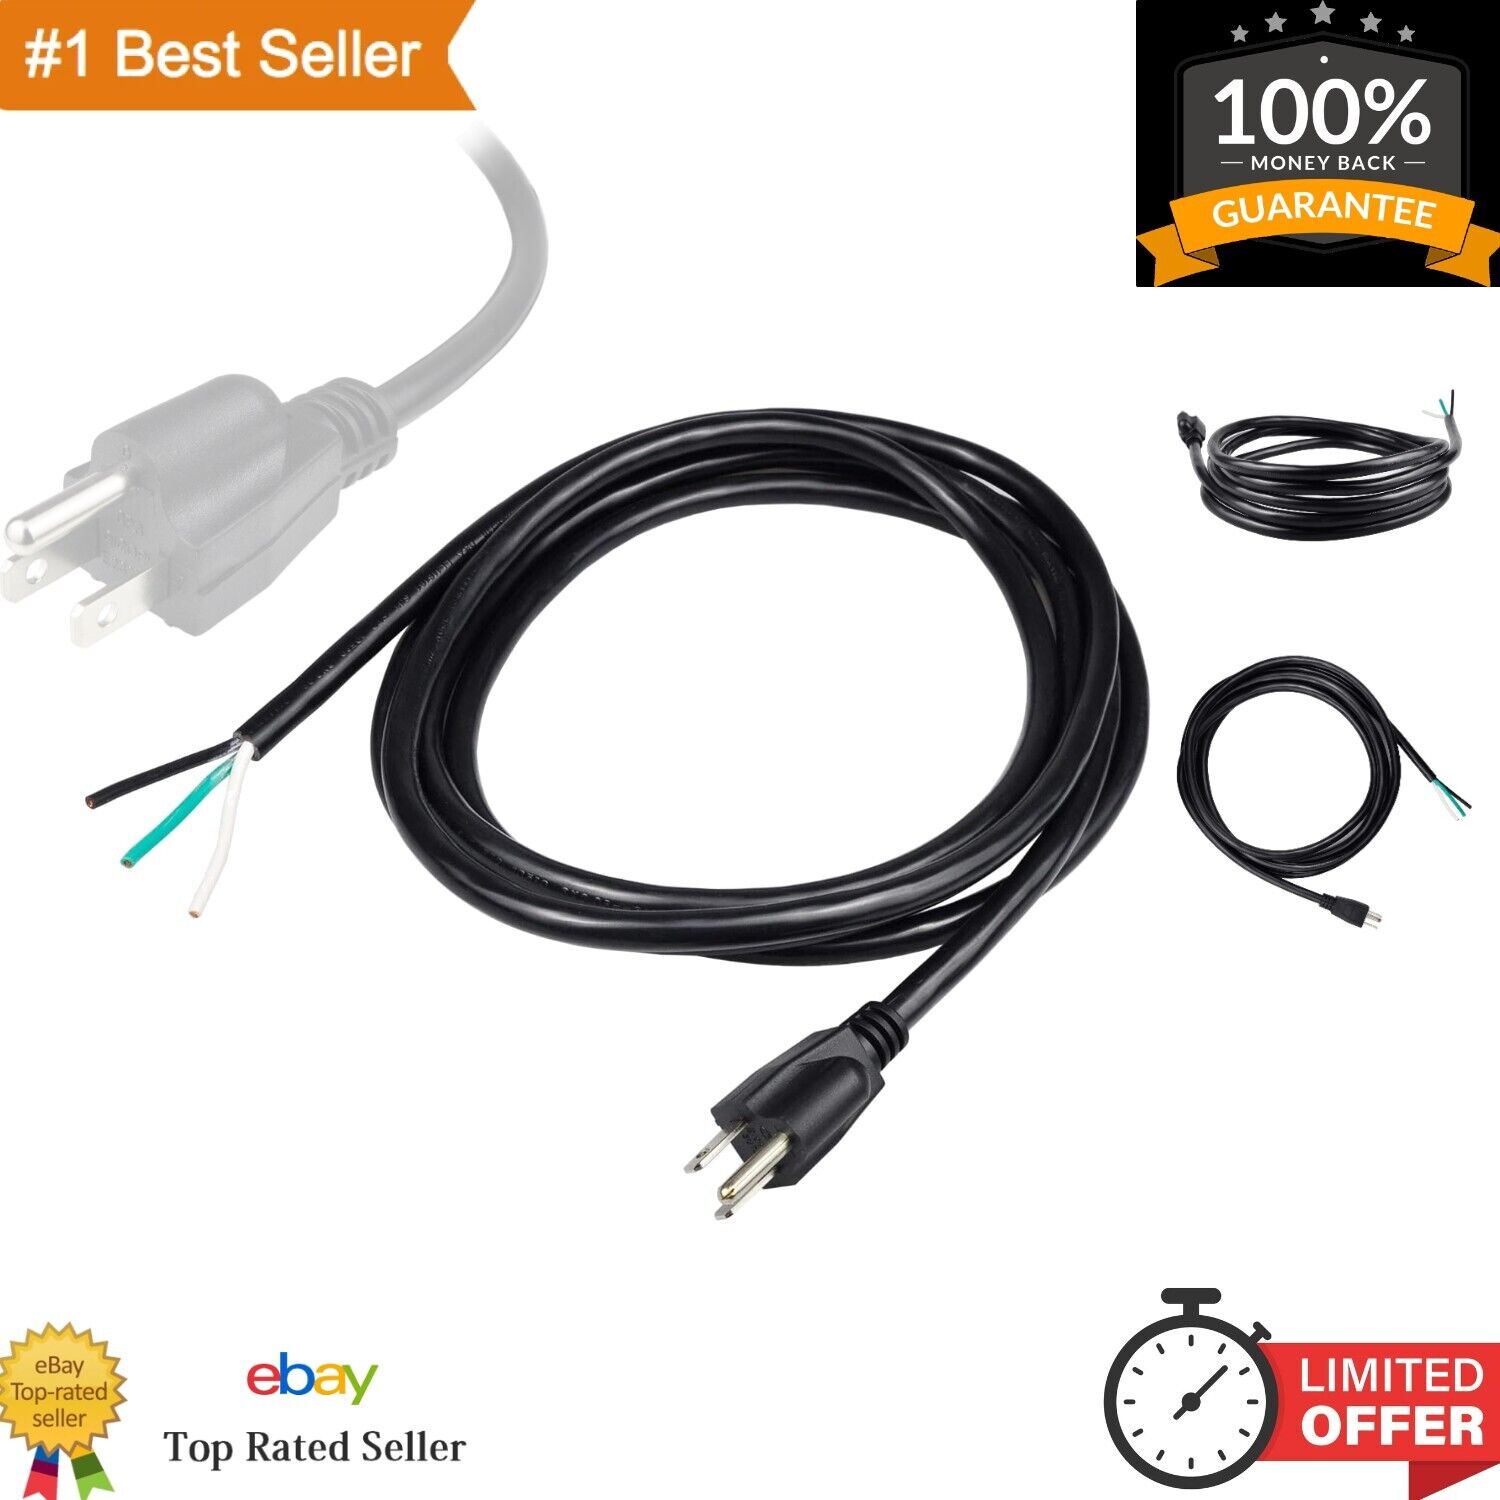 Universal AC Appliance Replacement Power Cord Cable - 10ft 14 Gauge 3 Prong